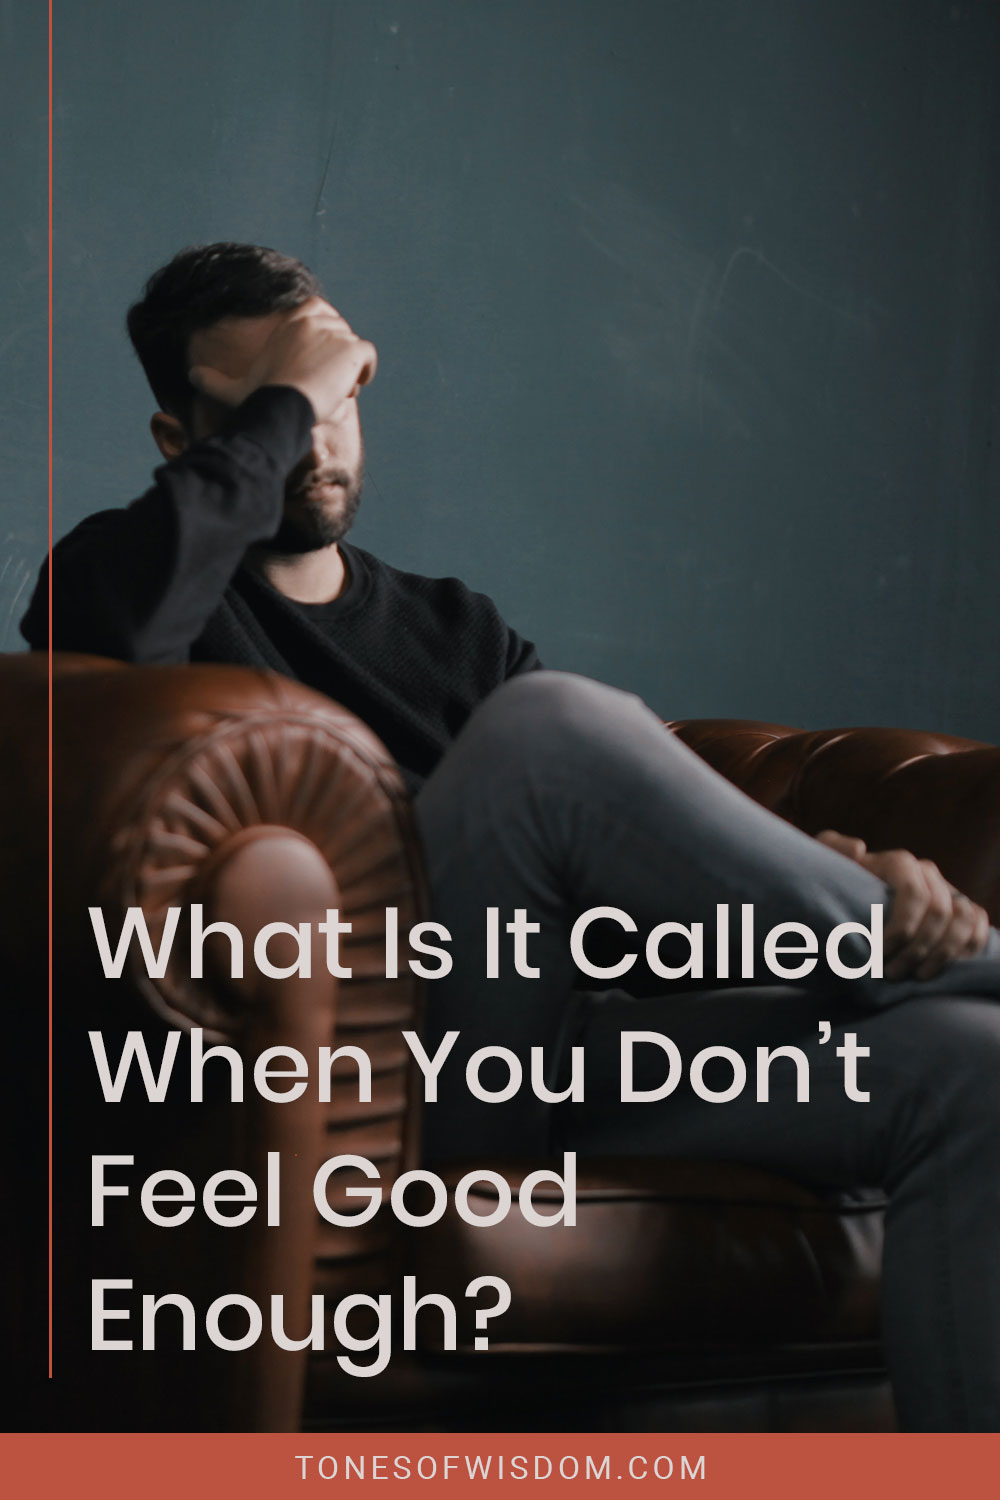 What Is It Called When You Don’t Feel Good Enough?